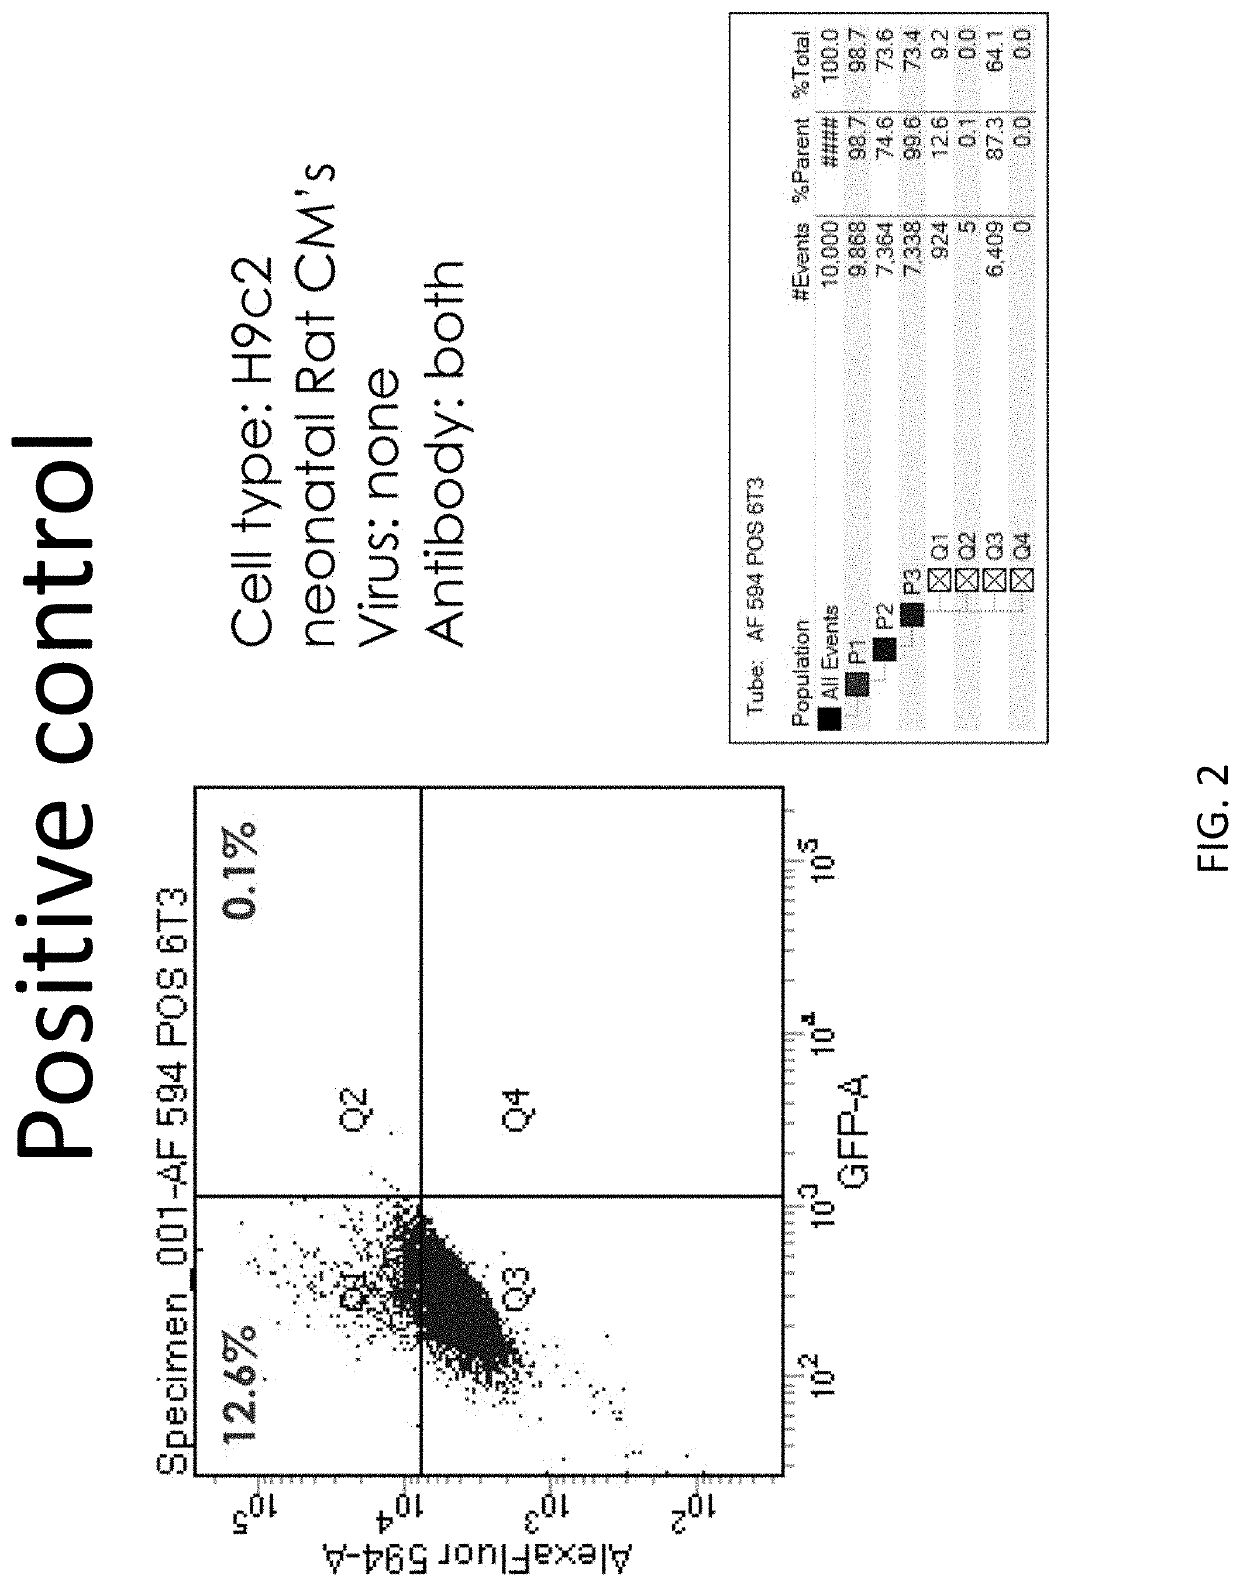 p63 INACTIVATION FOR THE TREATMENT OF HEART FAILURE